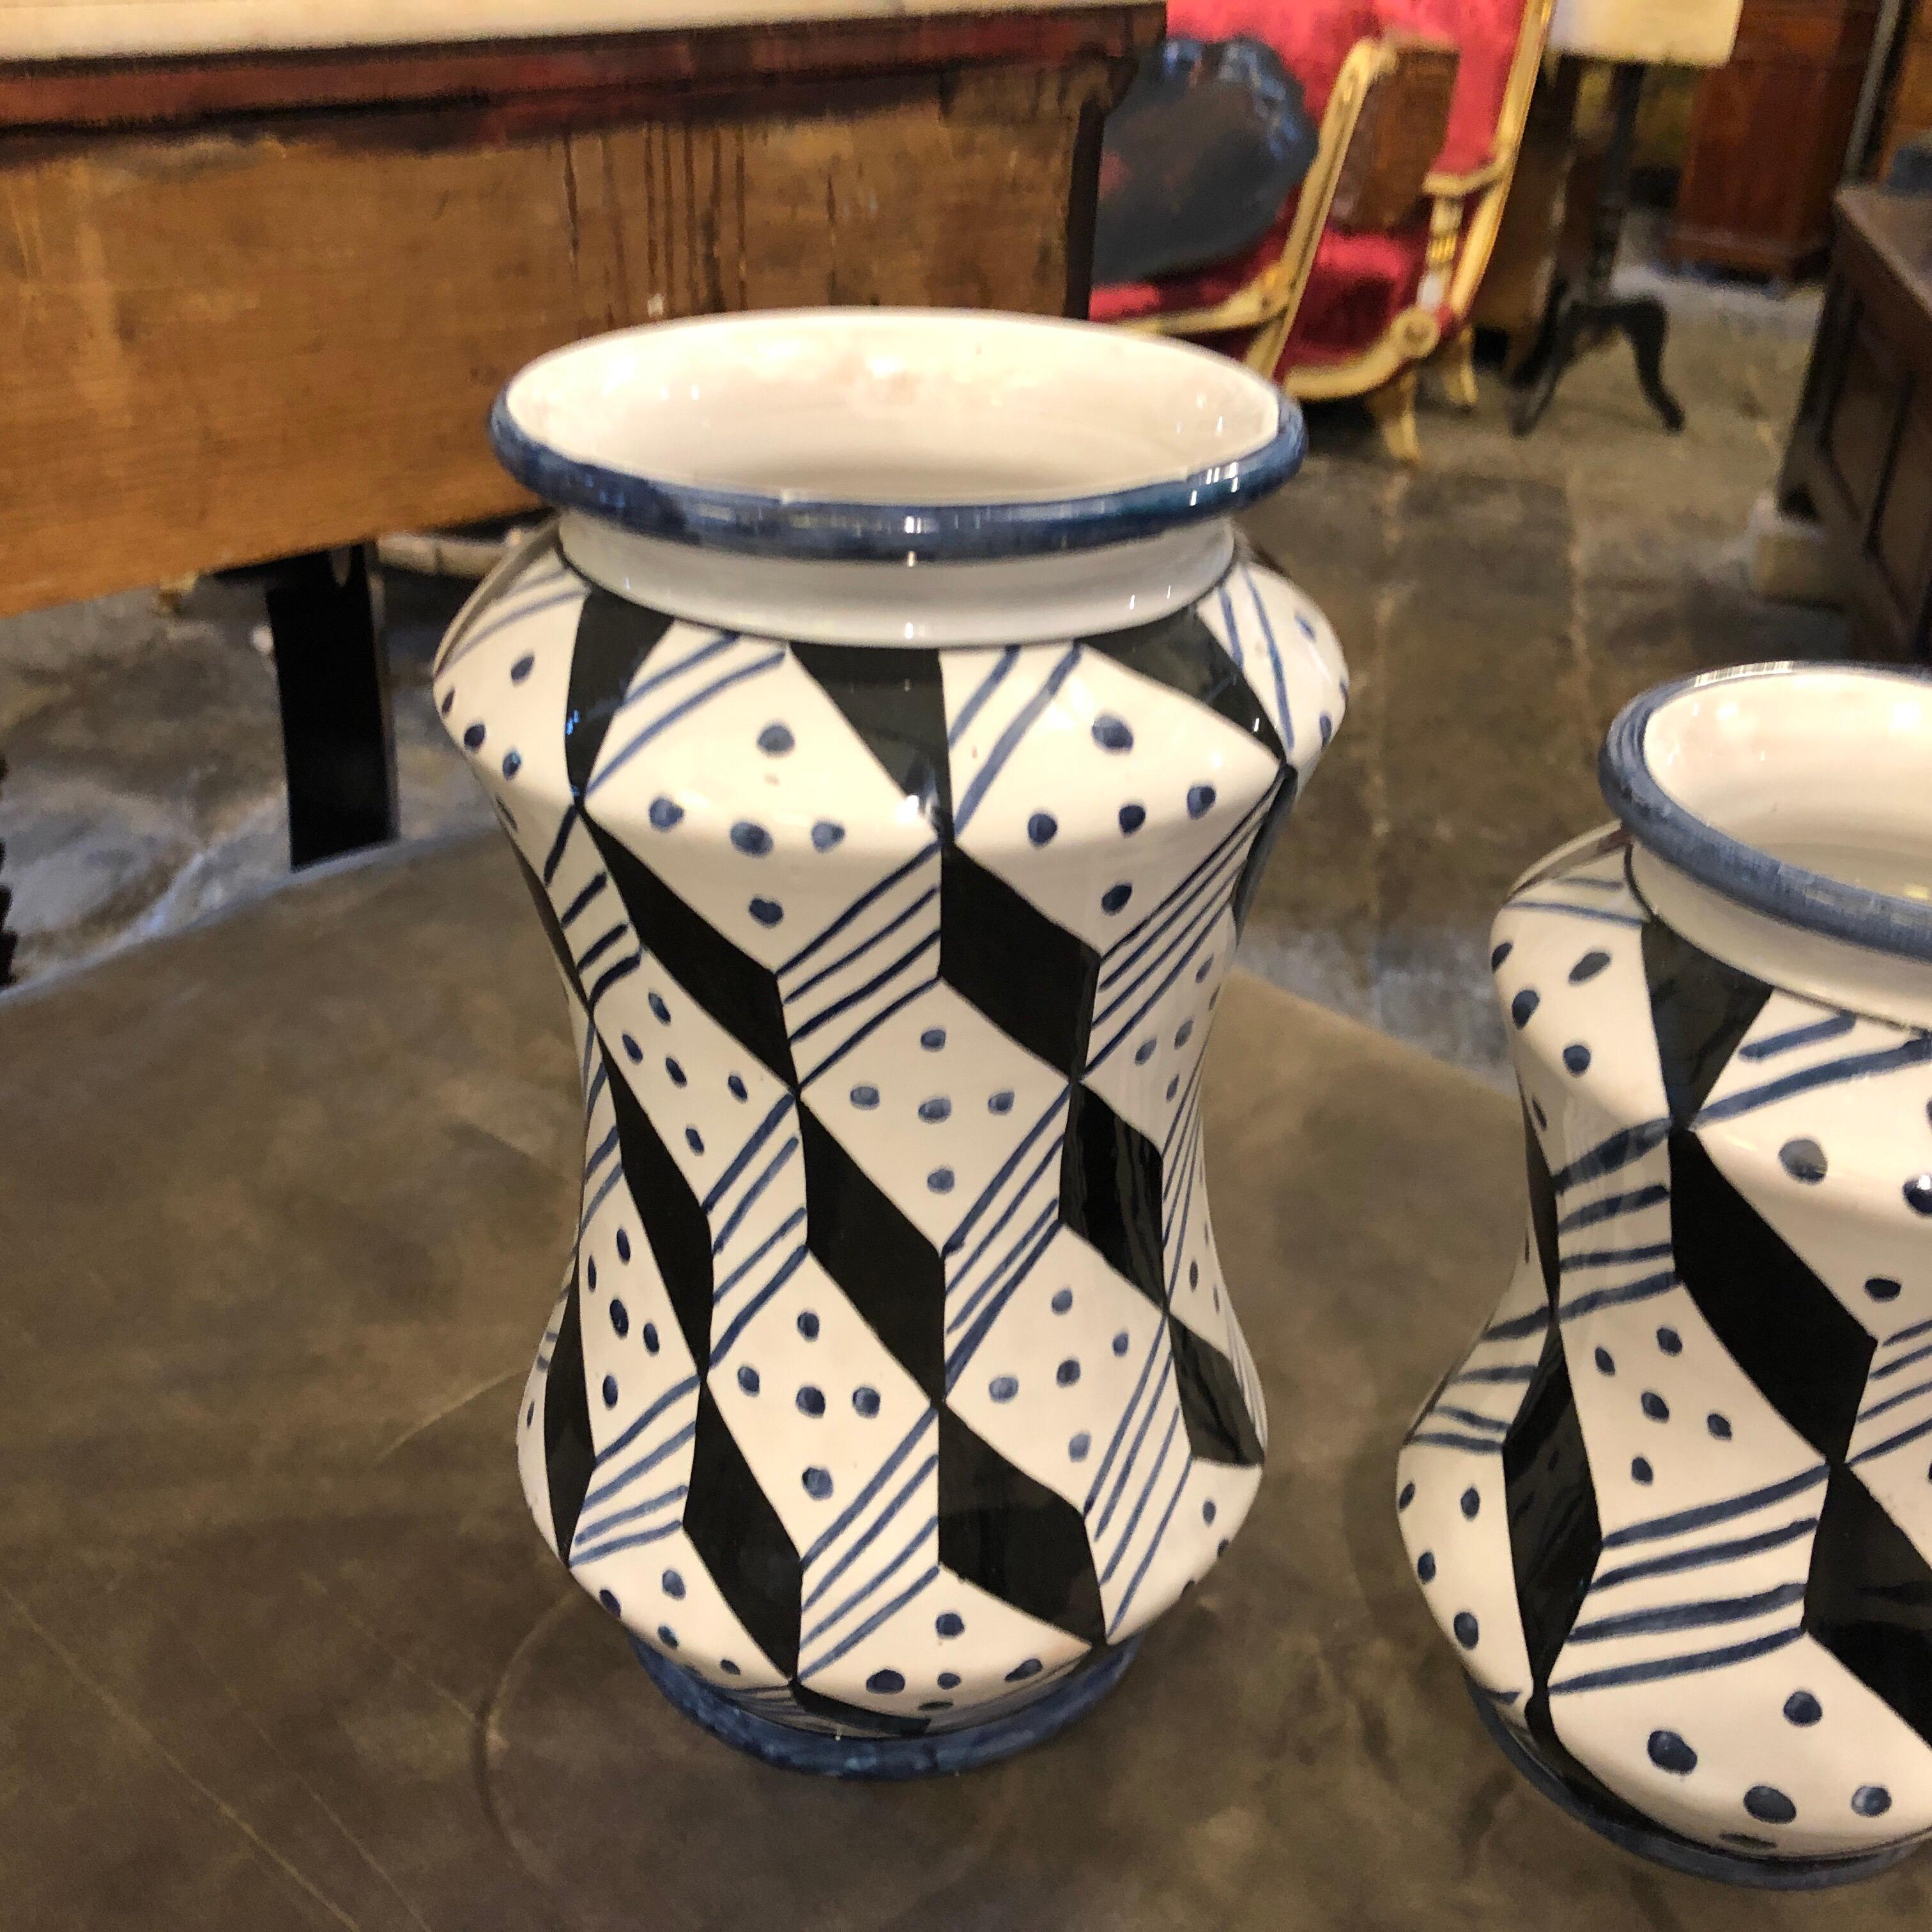 Three Sicilian vases named Alberello totally hand painted made exclusively for our shop. They are unique pieces signed on the bottom Antiques fuori le mura. It's a revisiting of antique pharmacy vases with a blue, black and white art deco decoration